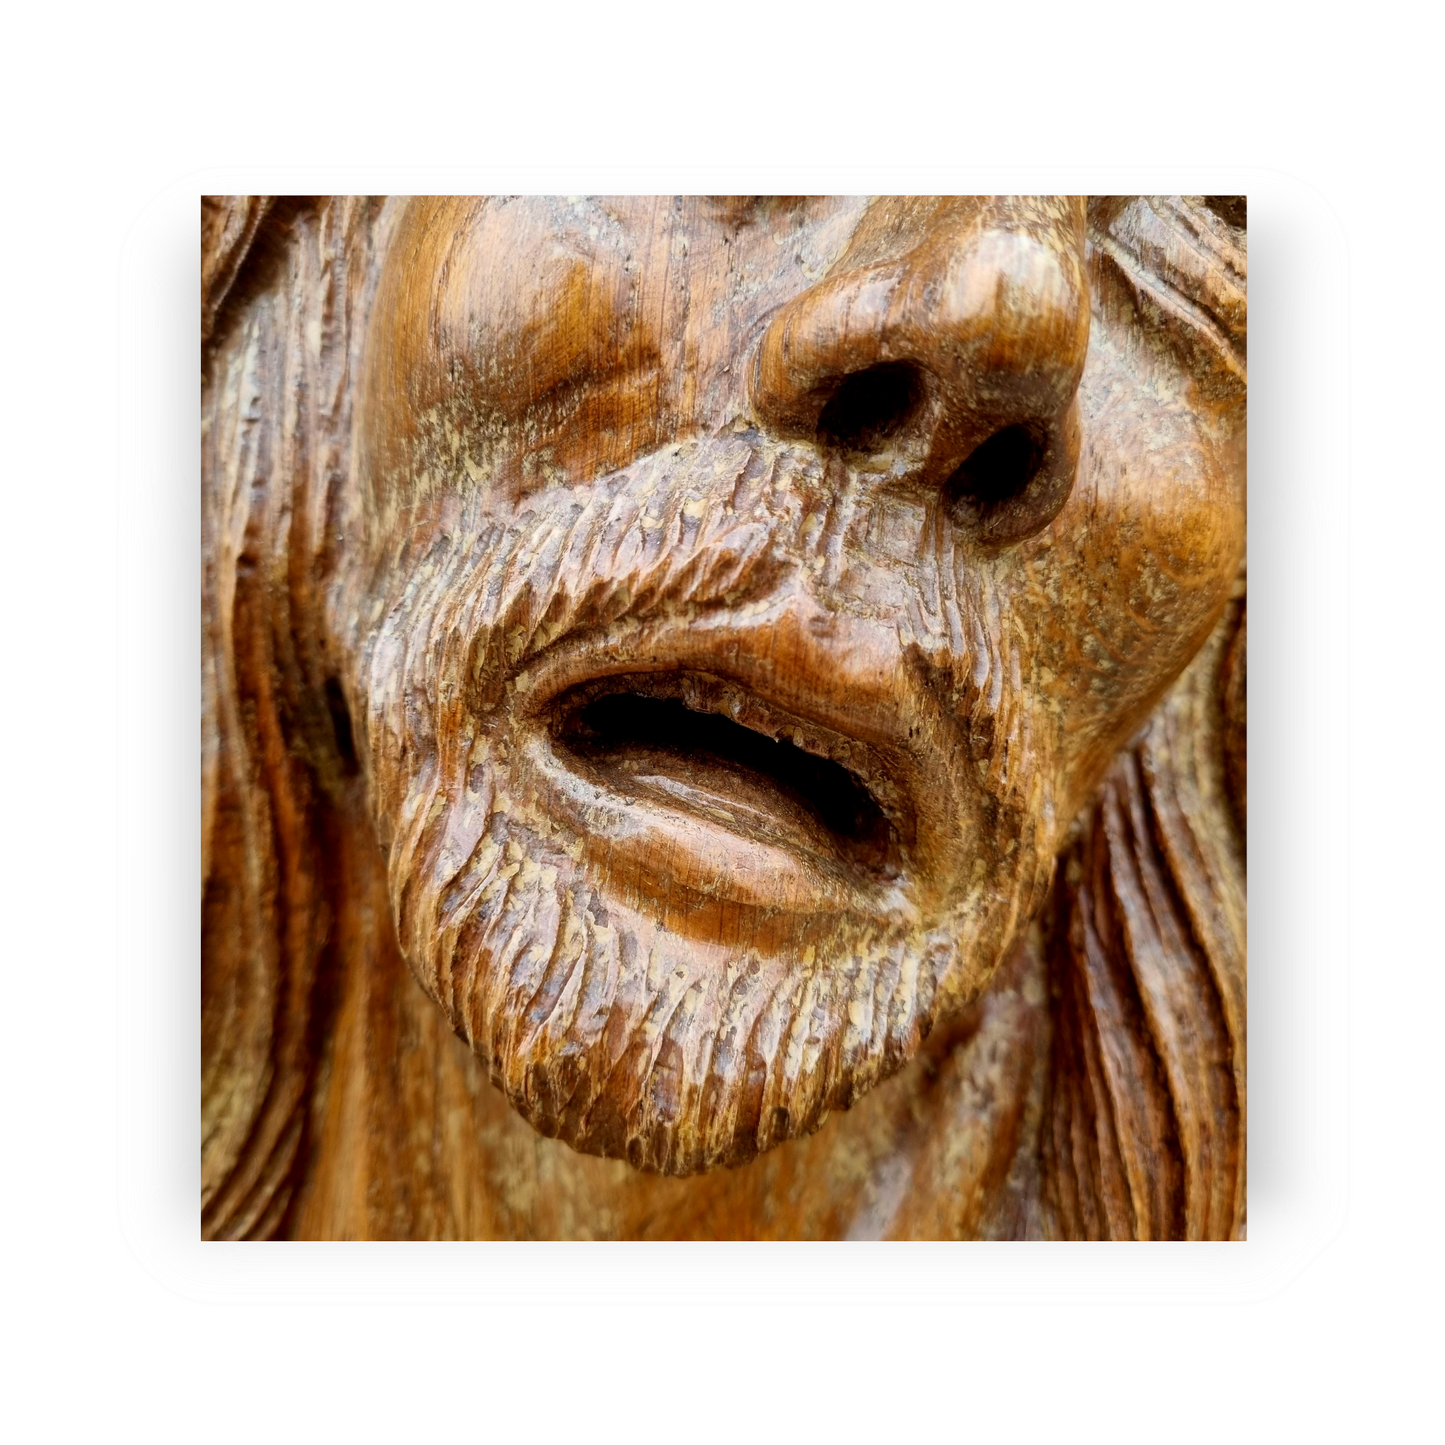 Large Life-Size 15th Century Flemish Antique Carved Wooden Sculpture Depicting The Head of Christ Wearing The Crown of Thorns